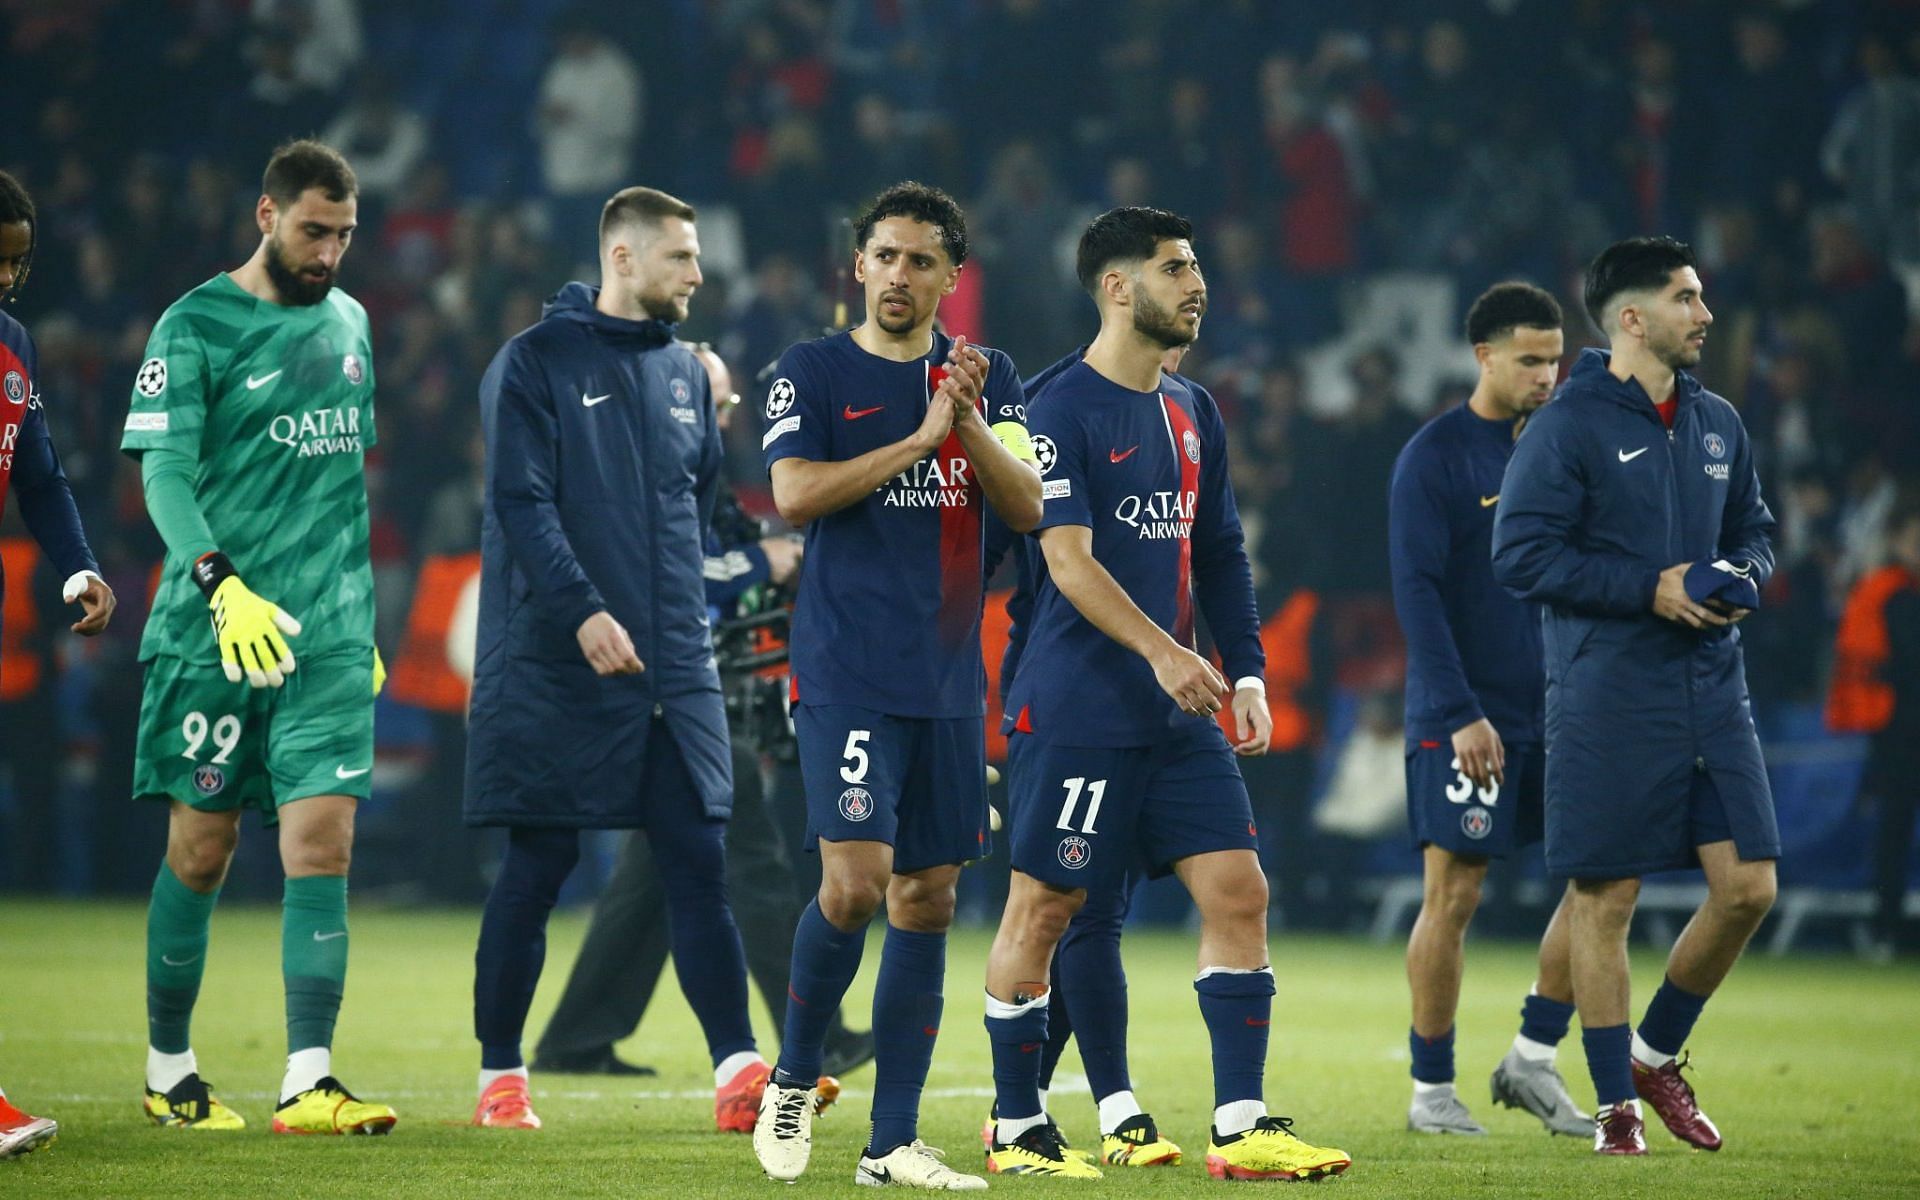 Can Paris St. Germain bounce back from their European heartbreak to win this weekend?